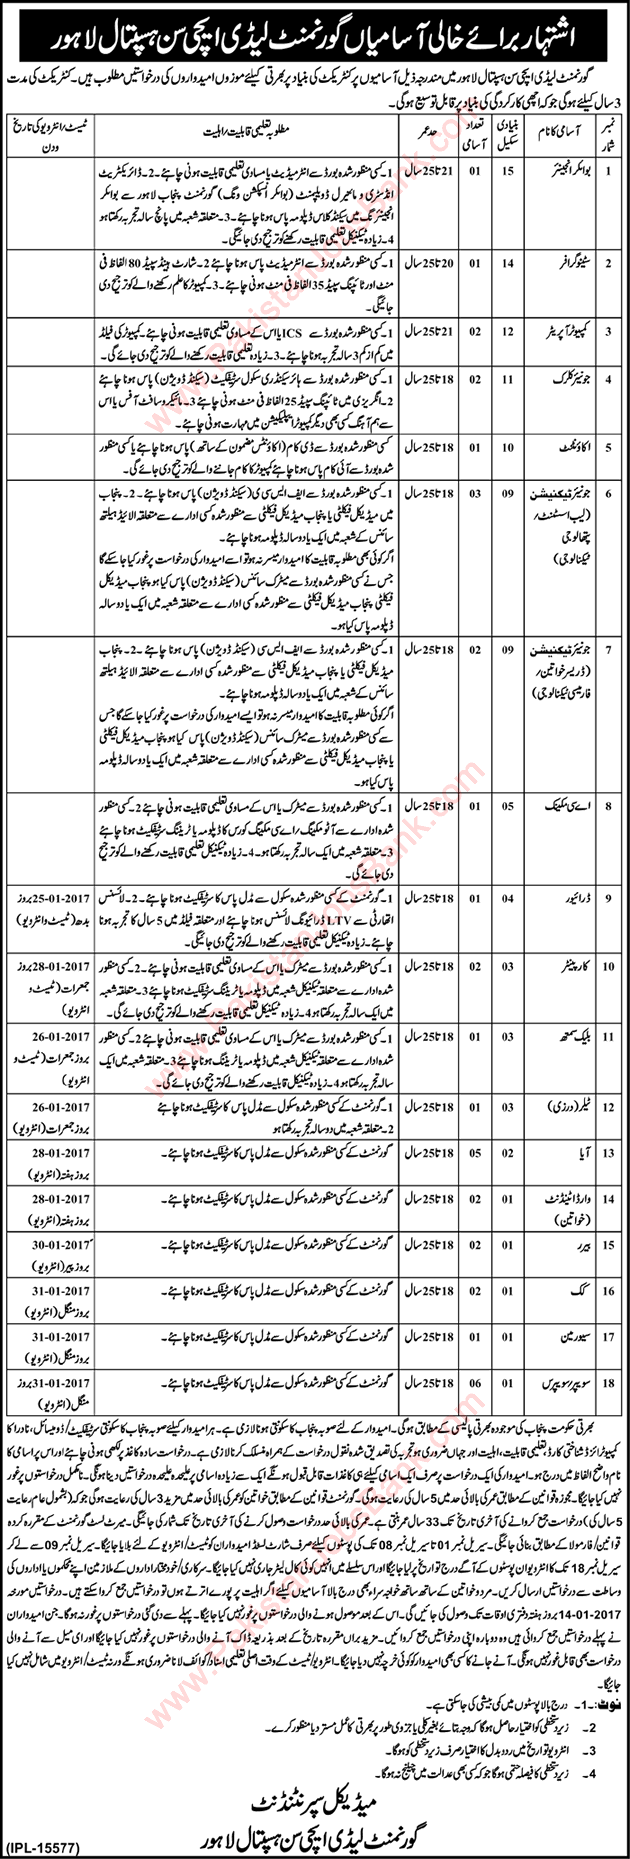 Government Lady Aitchison Hospital Lahore Jobs December 2016 / 2017 Lab Assistants, Clerks & Others Latest